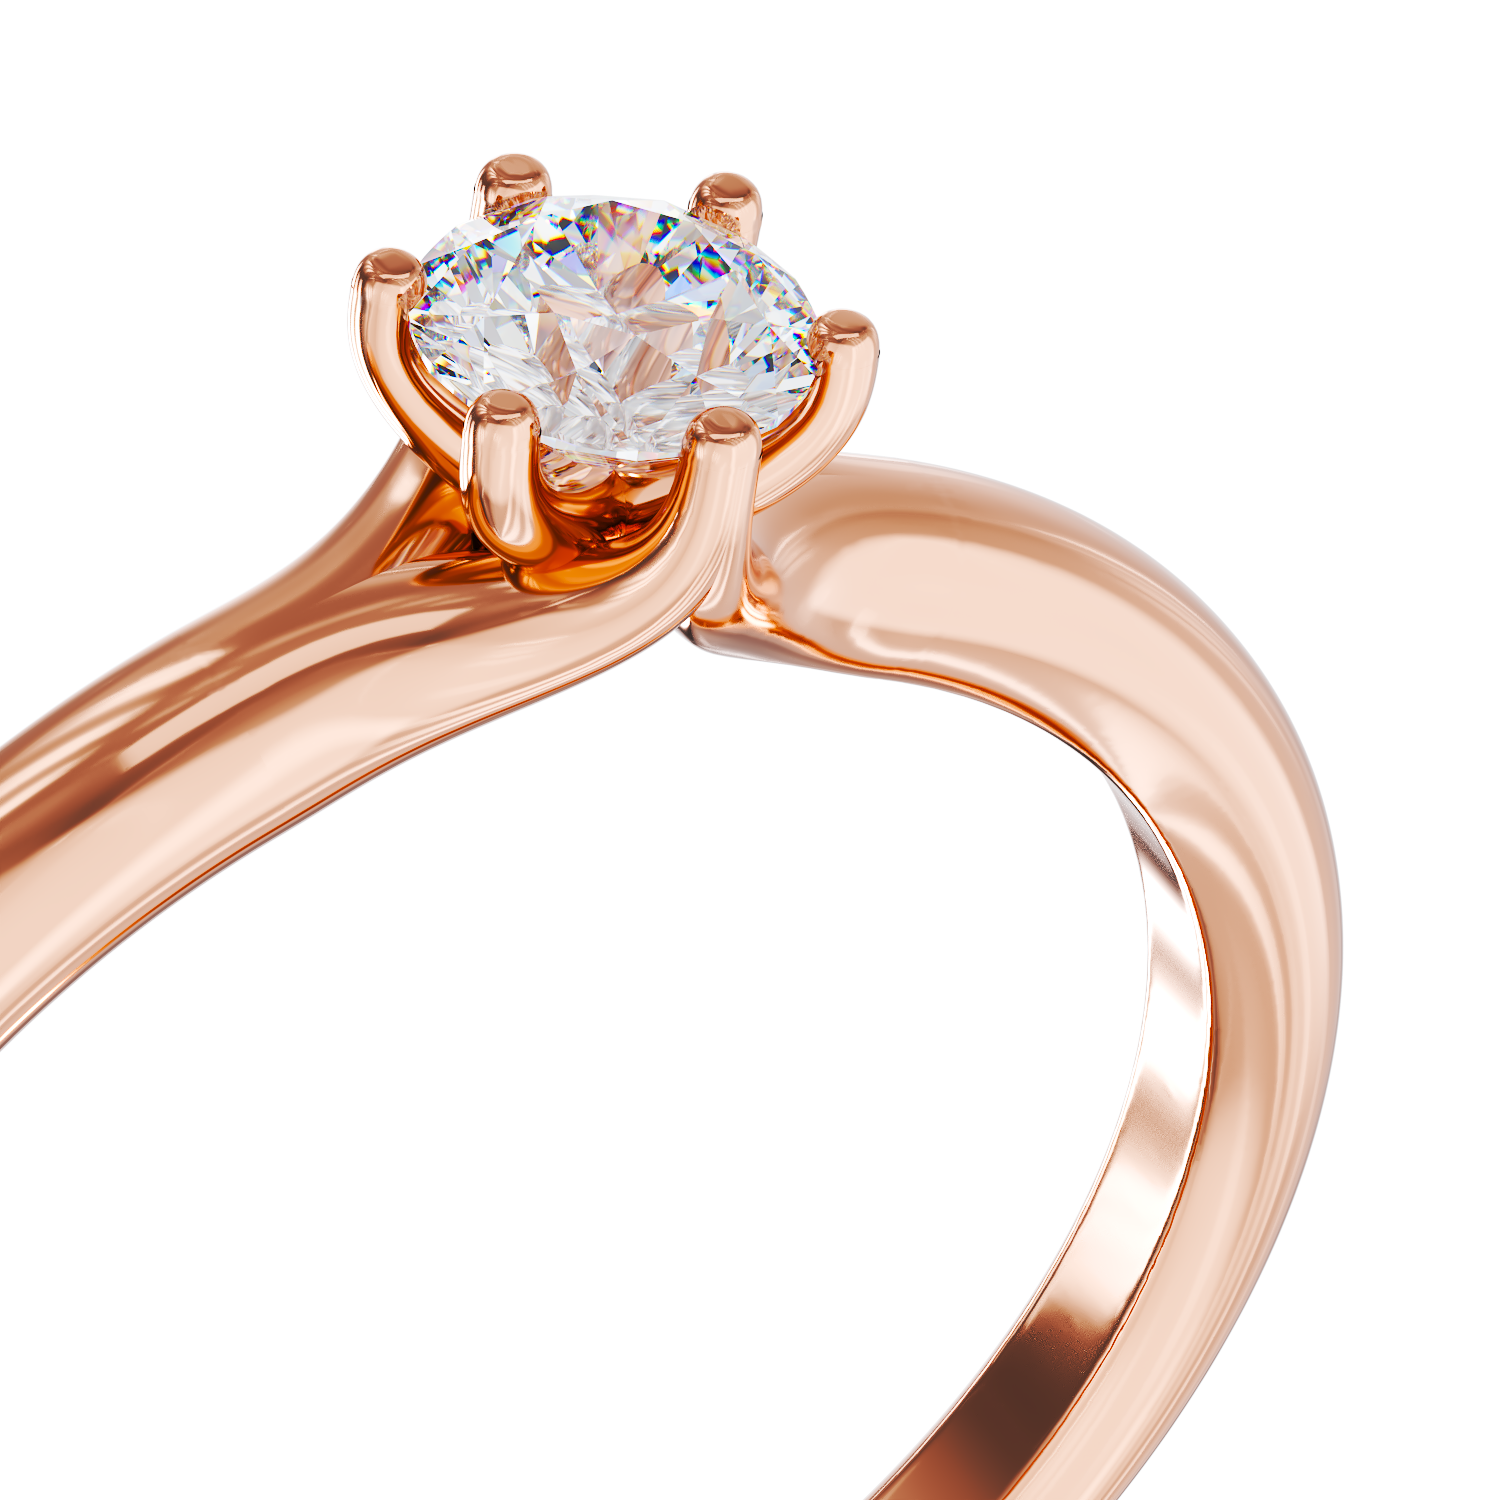 Rose gold engagement ring with 0.24ct solitaire diamond